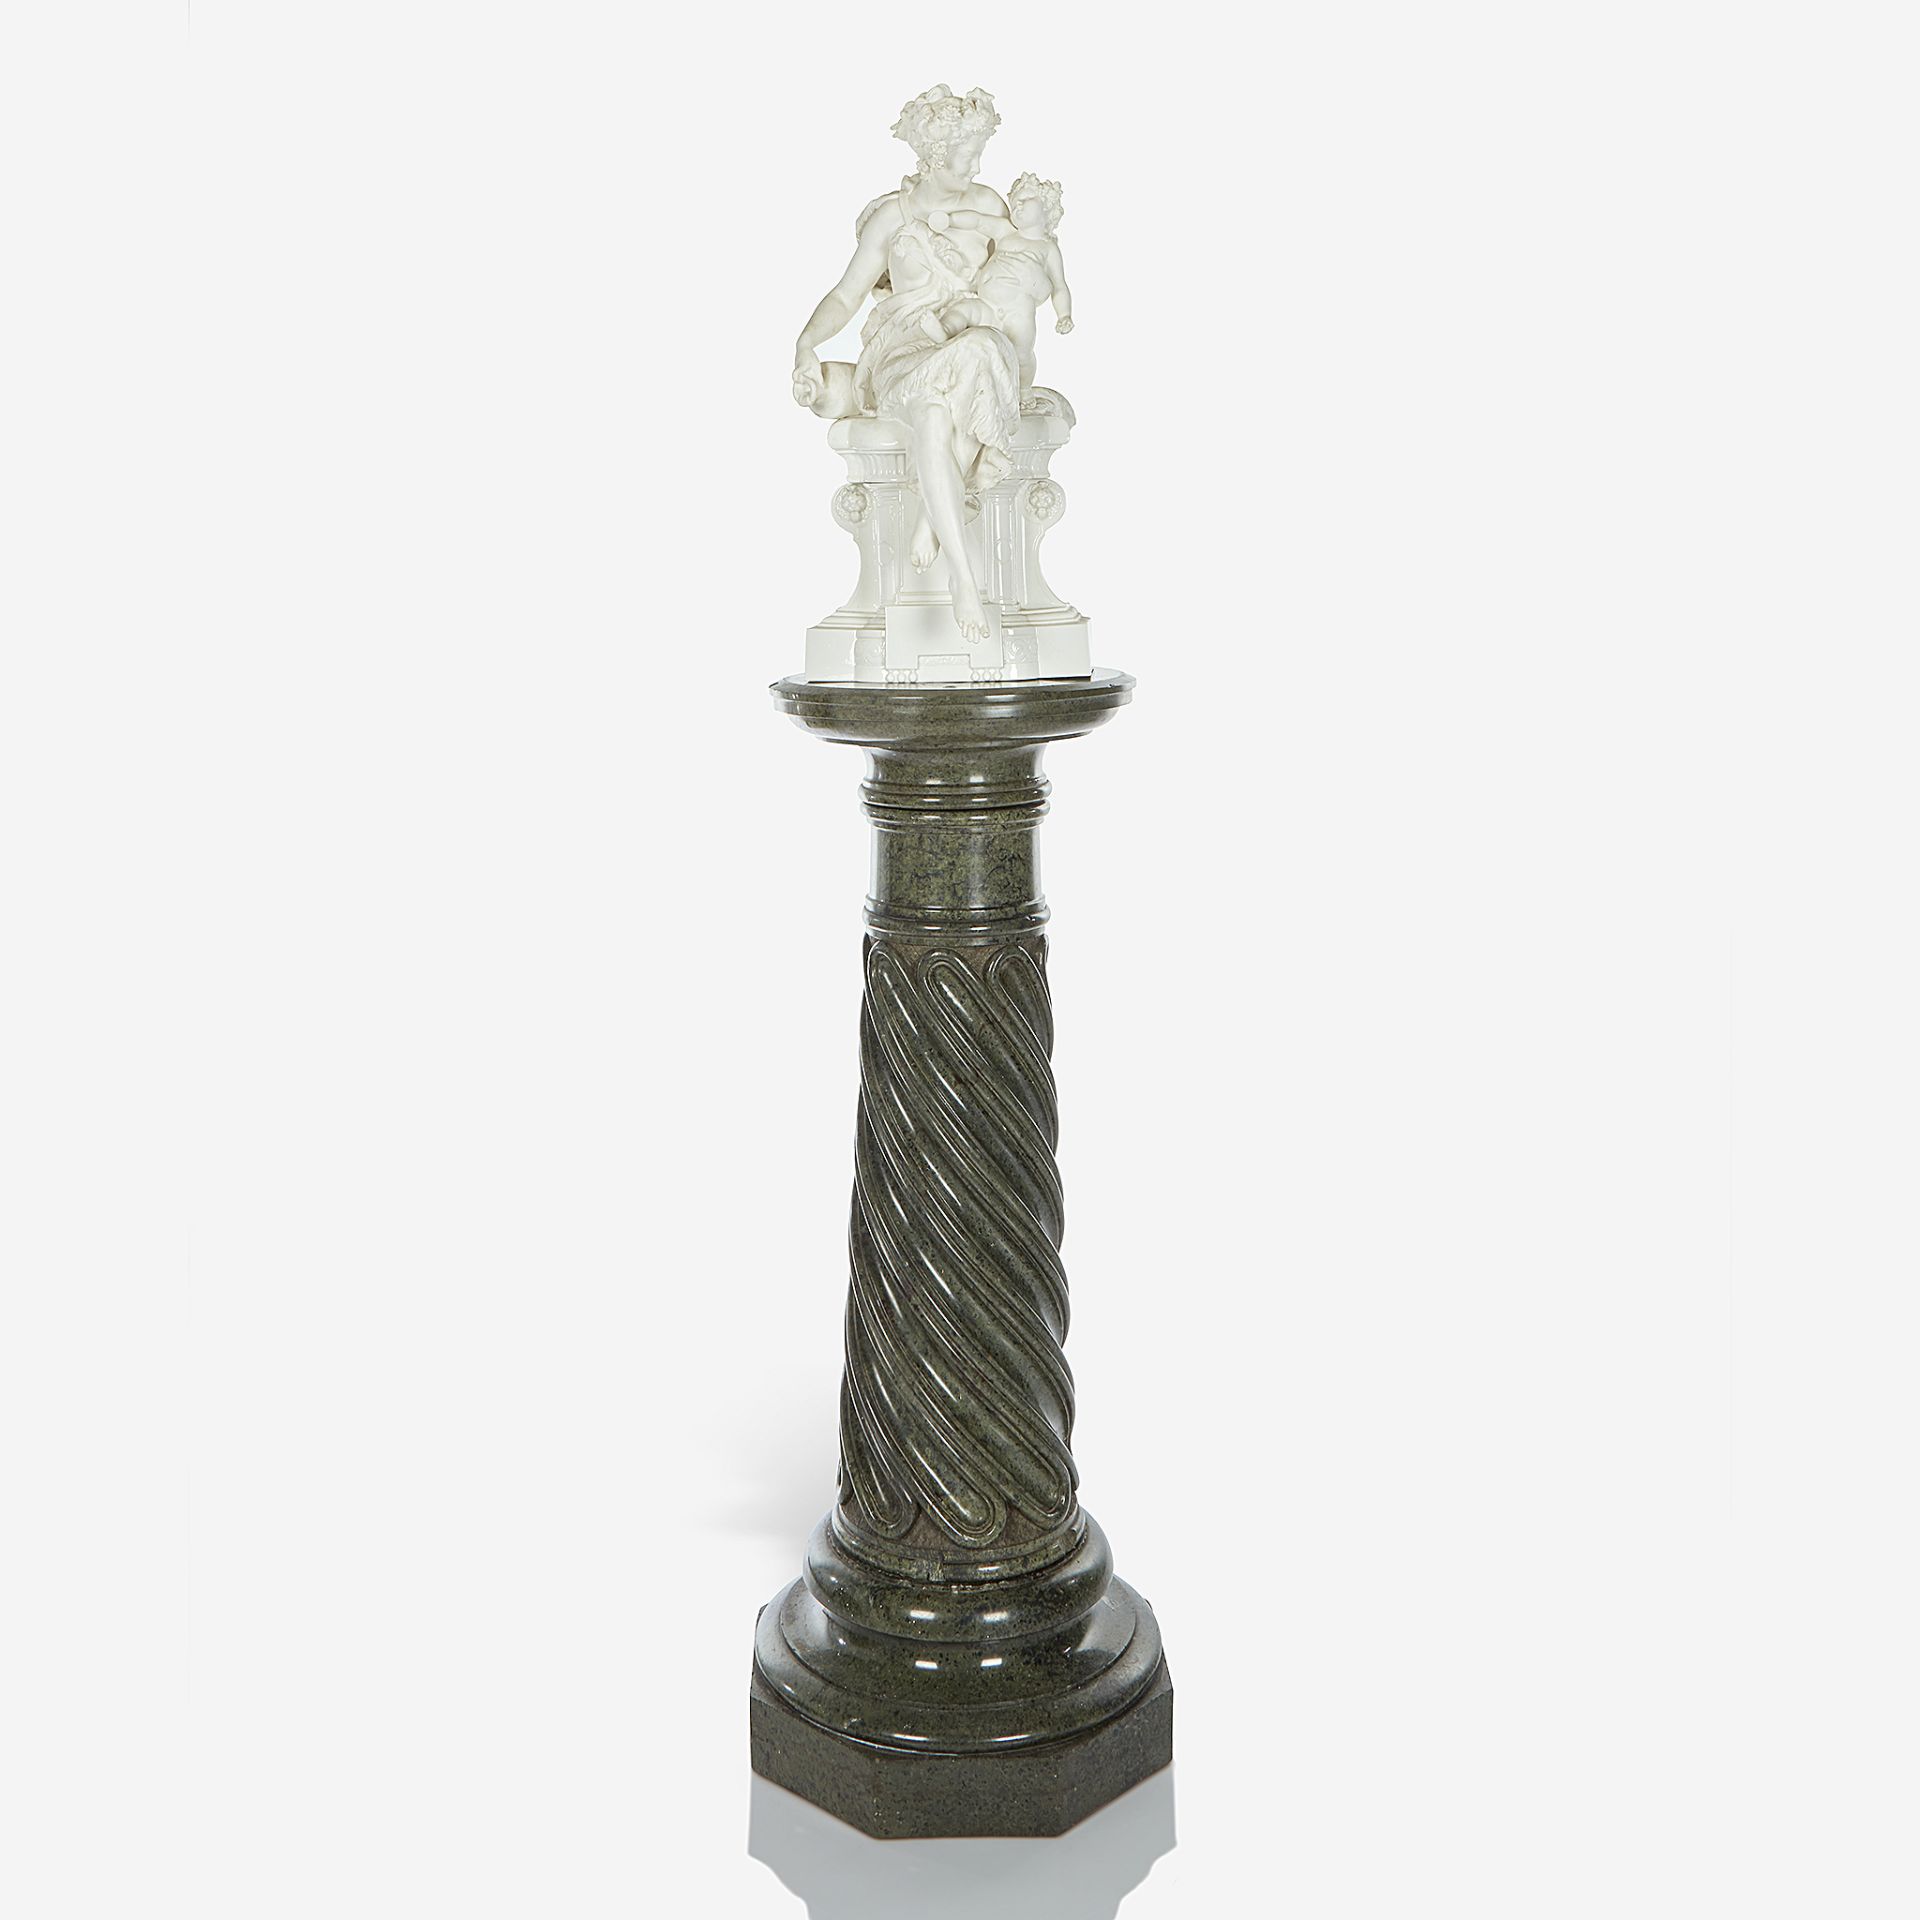 A Neoclassical bisque figural group on green marble pedestal, William Brownfield & Sons, Cobridge, d